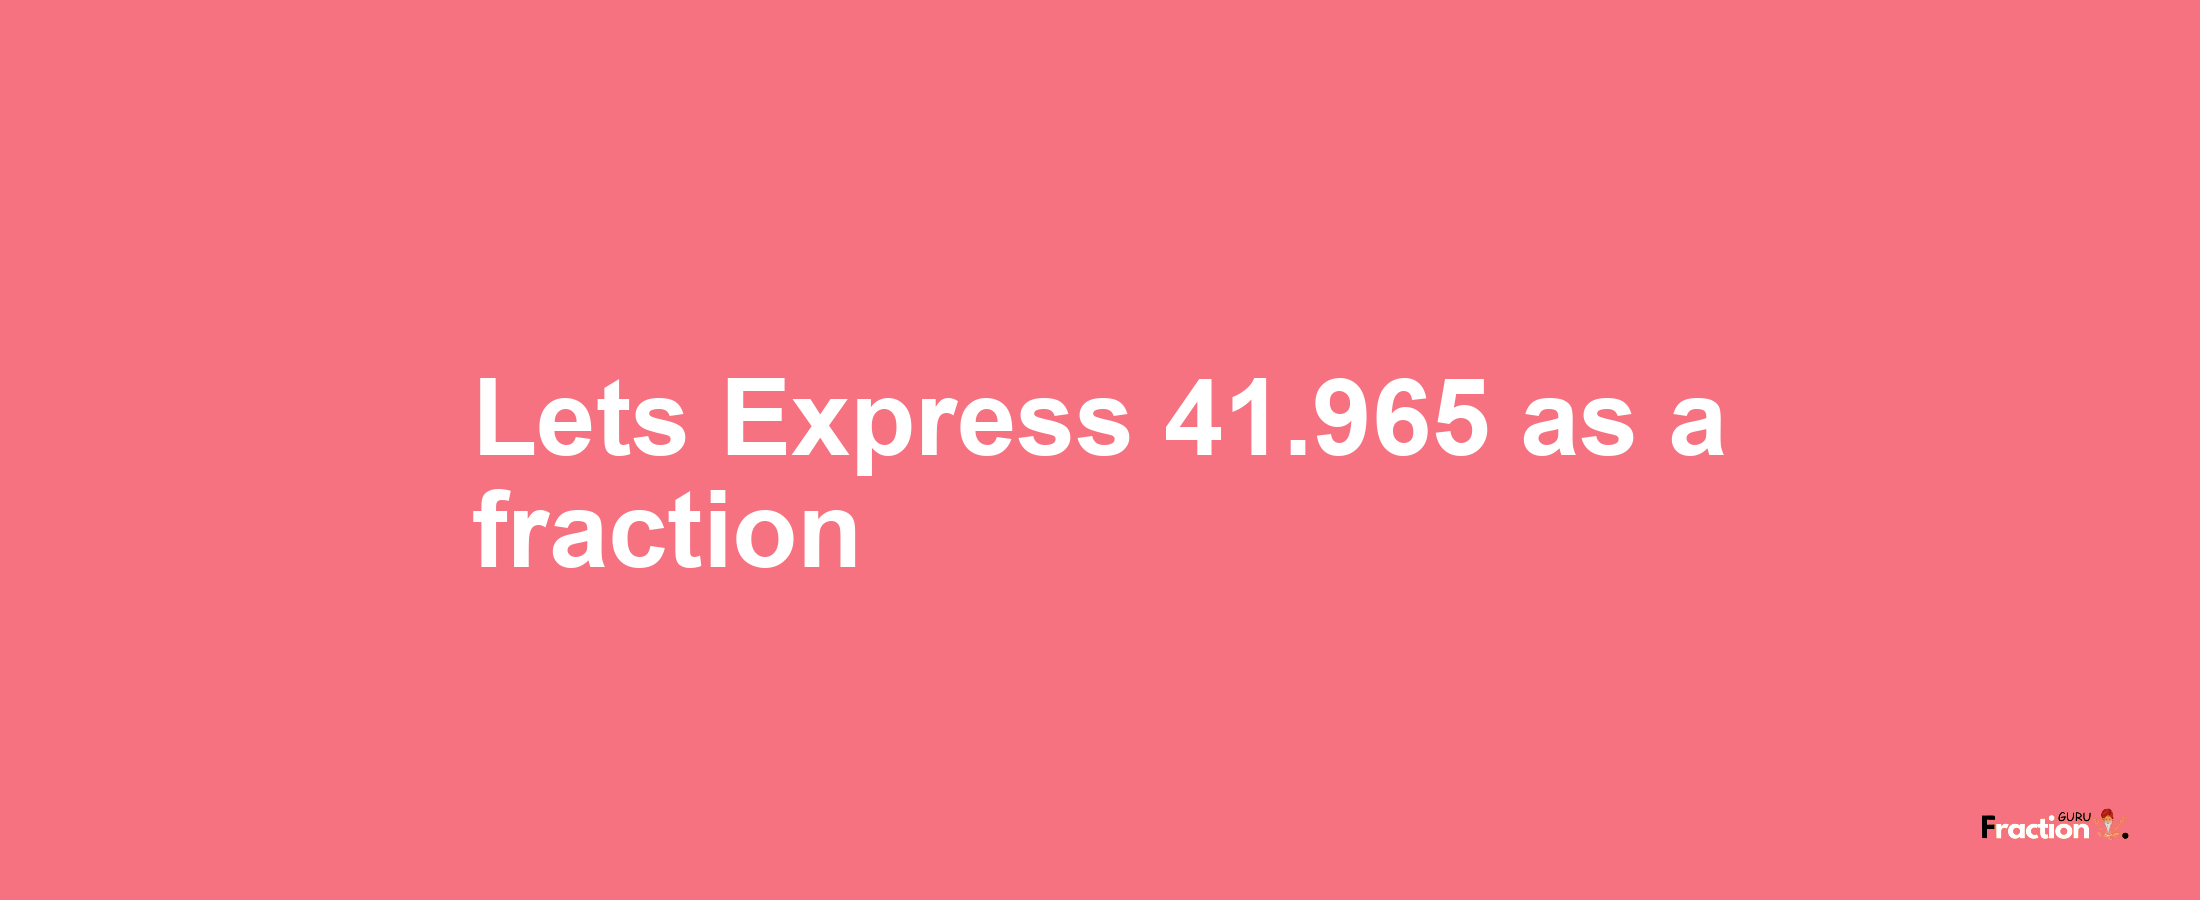 Lets Express 41.965 as afraction